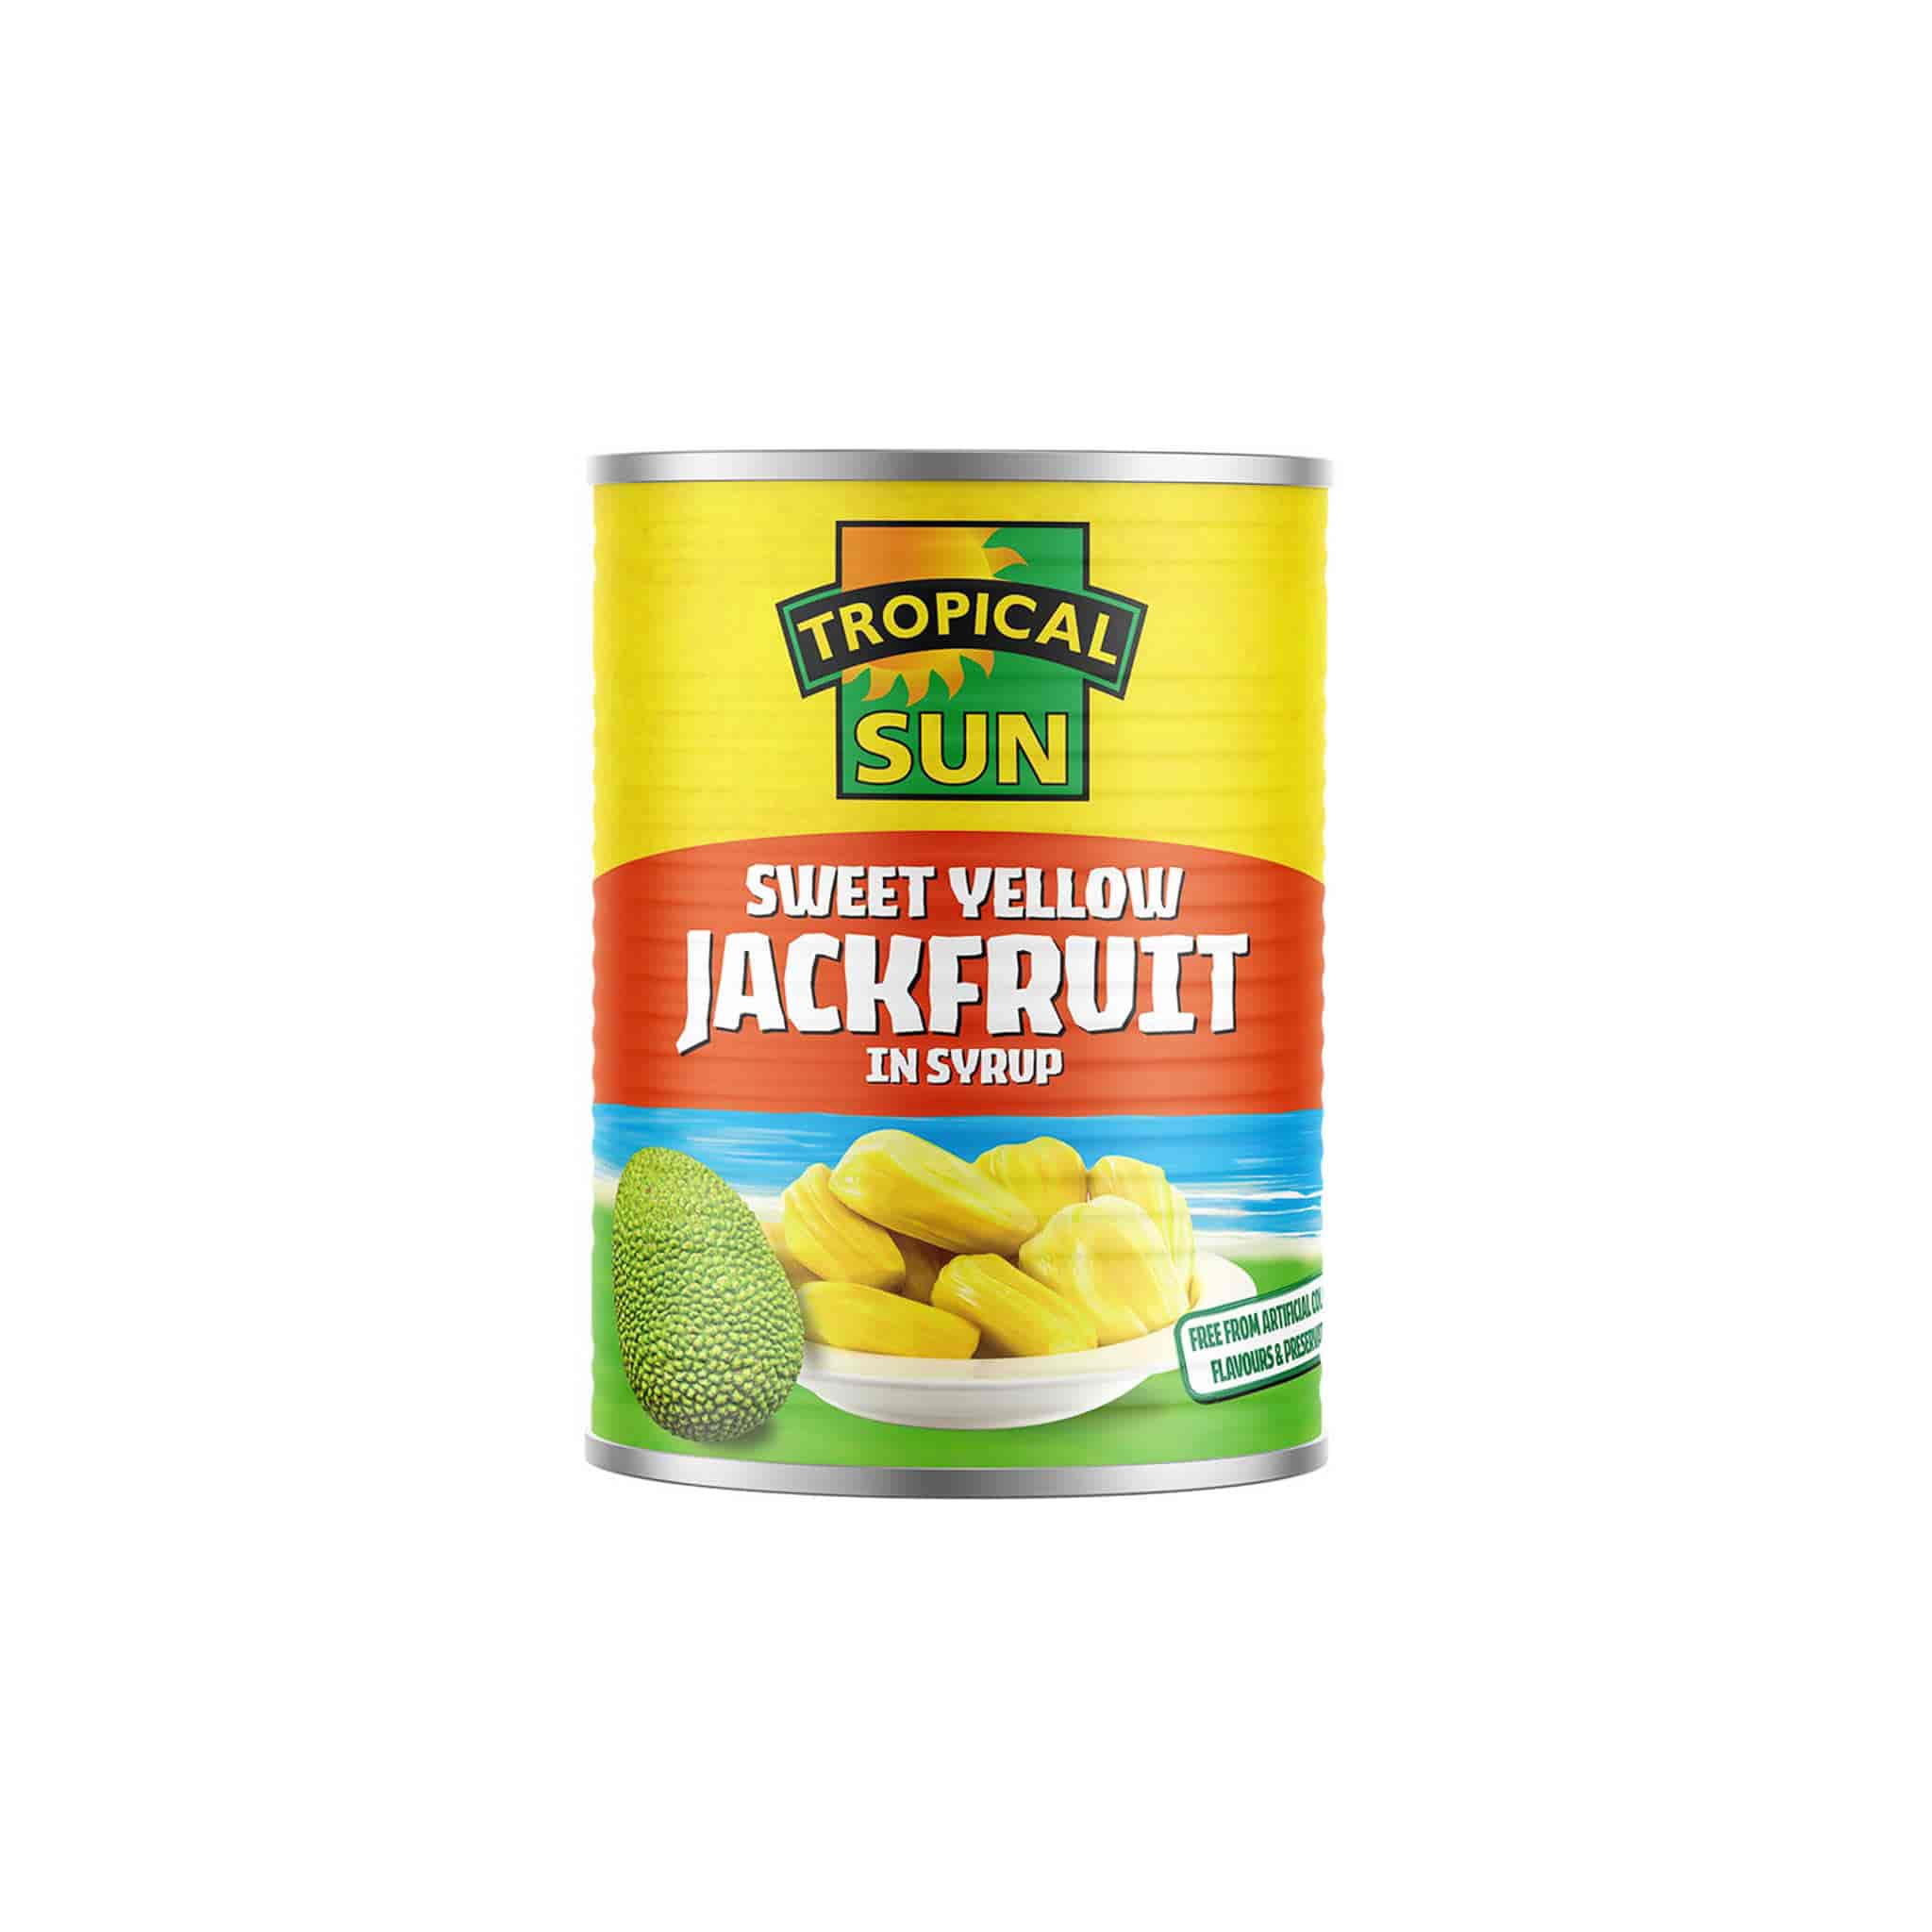 Tropical Sun Yellow Jackfruit in Syrup, 565g